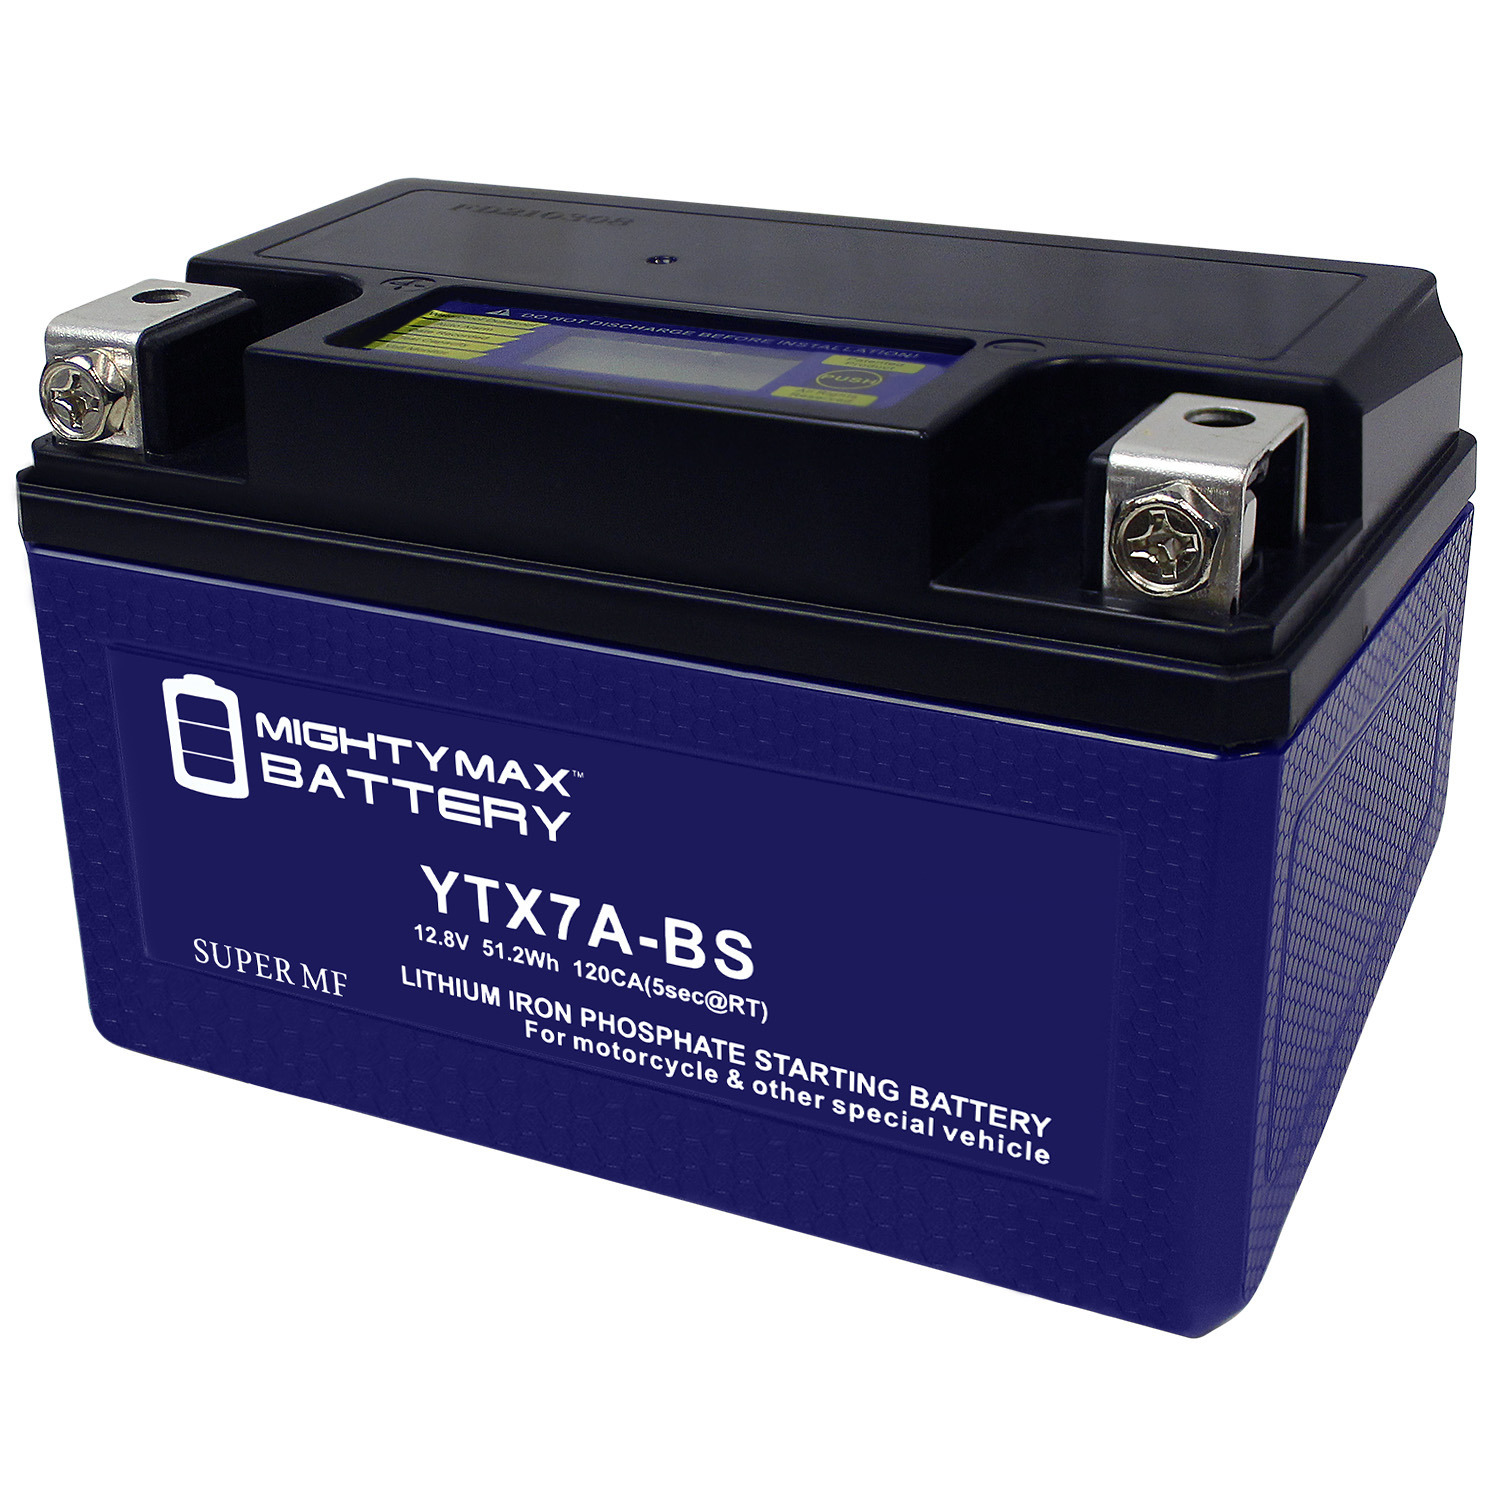 Mighty Max Battery YTX7A-BSLIFEPO4 - 12 Volt 6 AH, 240 CCA, Lithium Iron Phosphate (LiFePO4) Battery - YTX7A-BSLIFEPO4